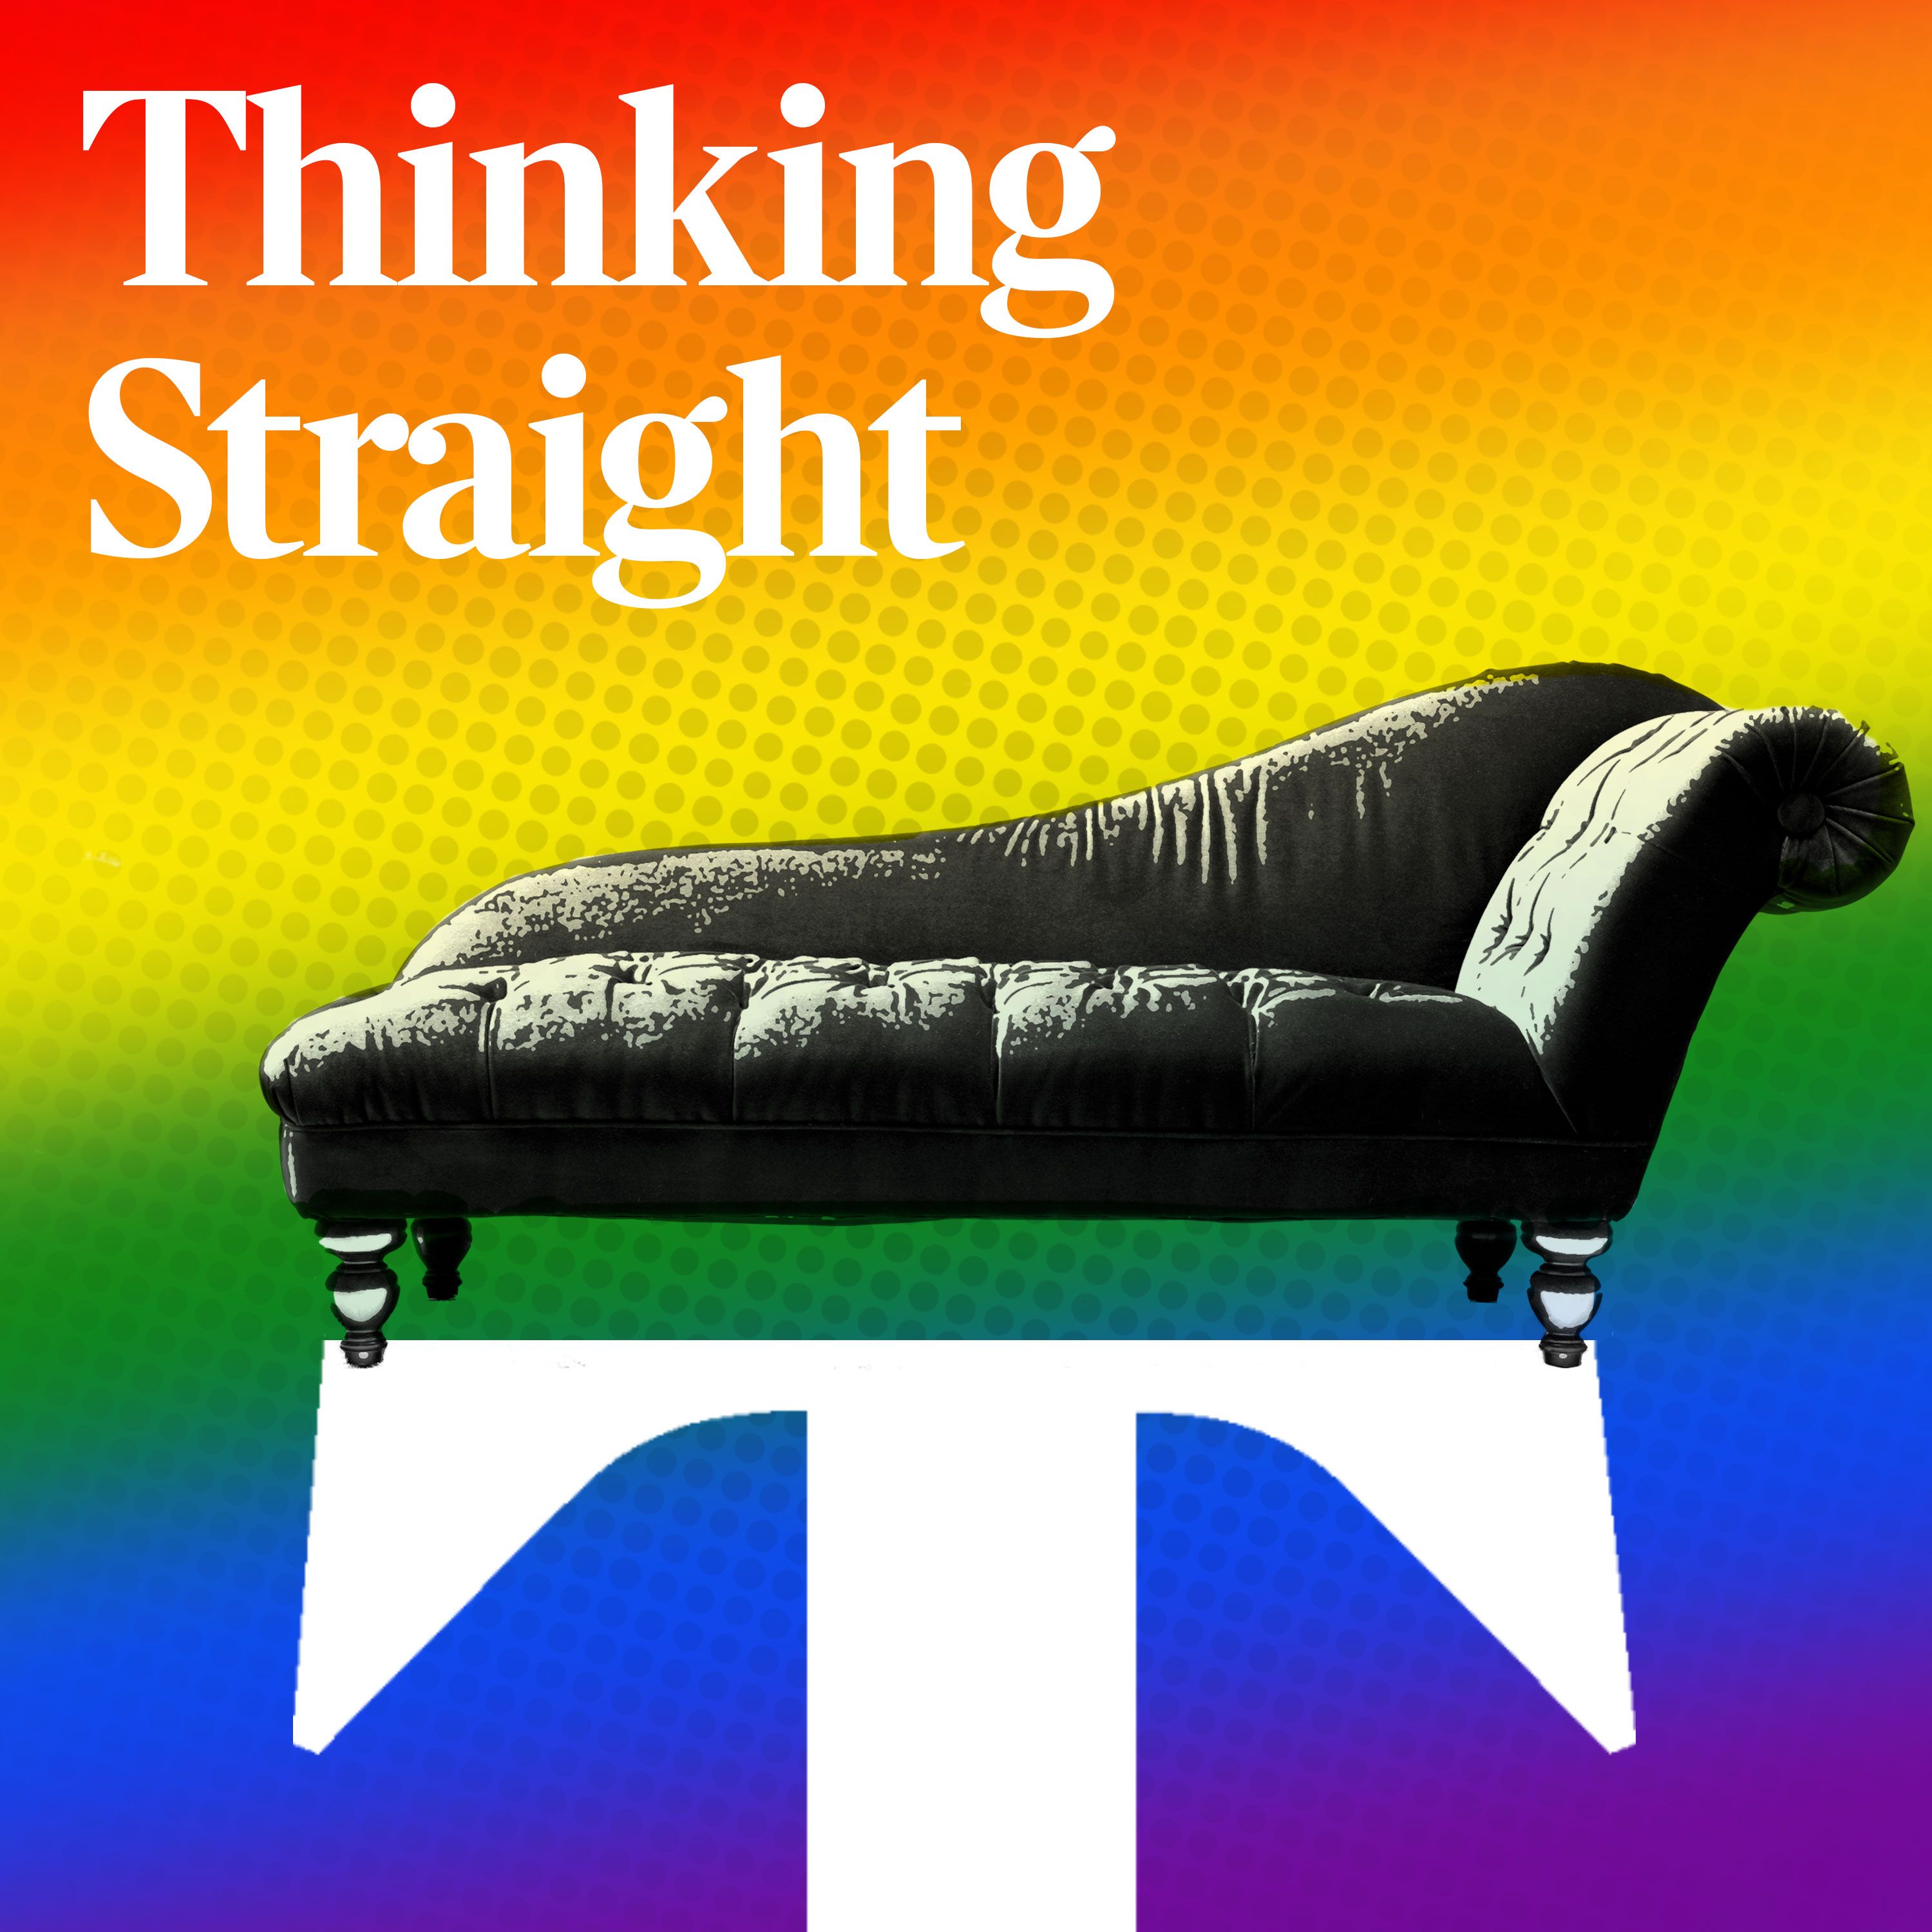 Coming soon: Thinking Straight